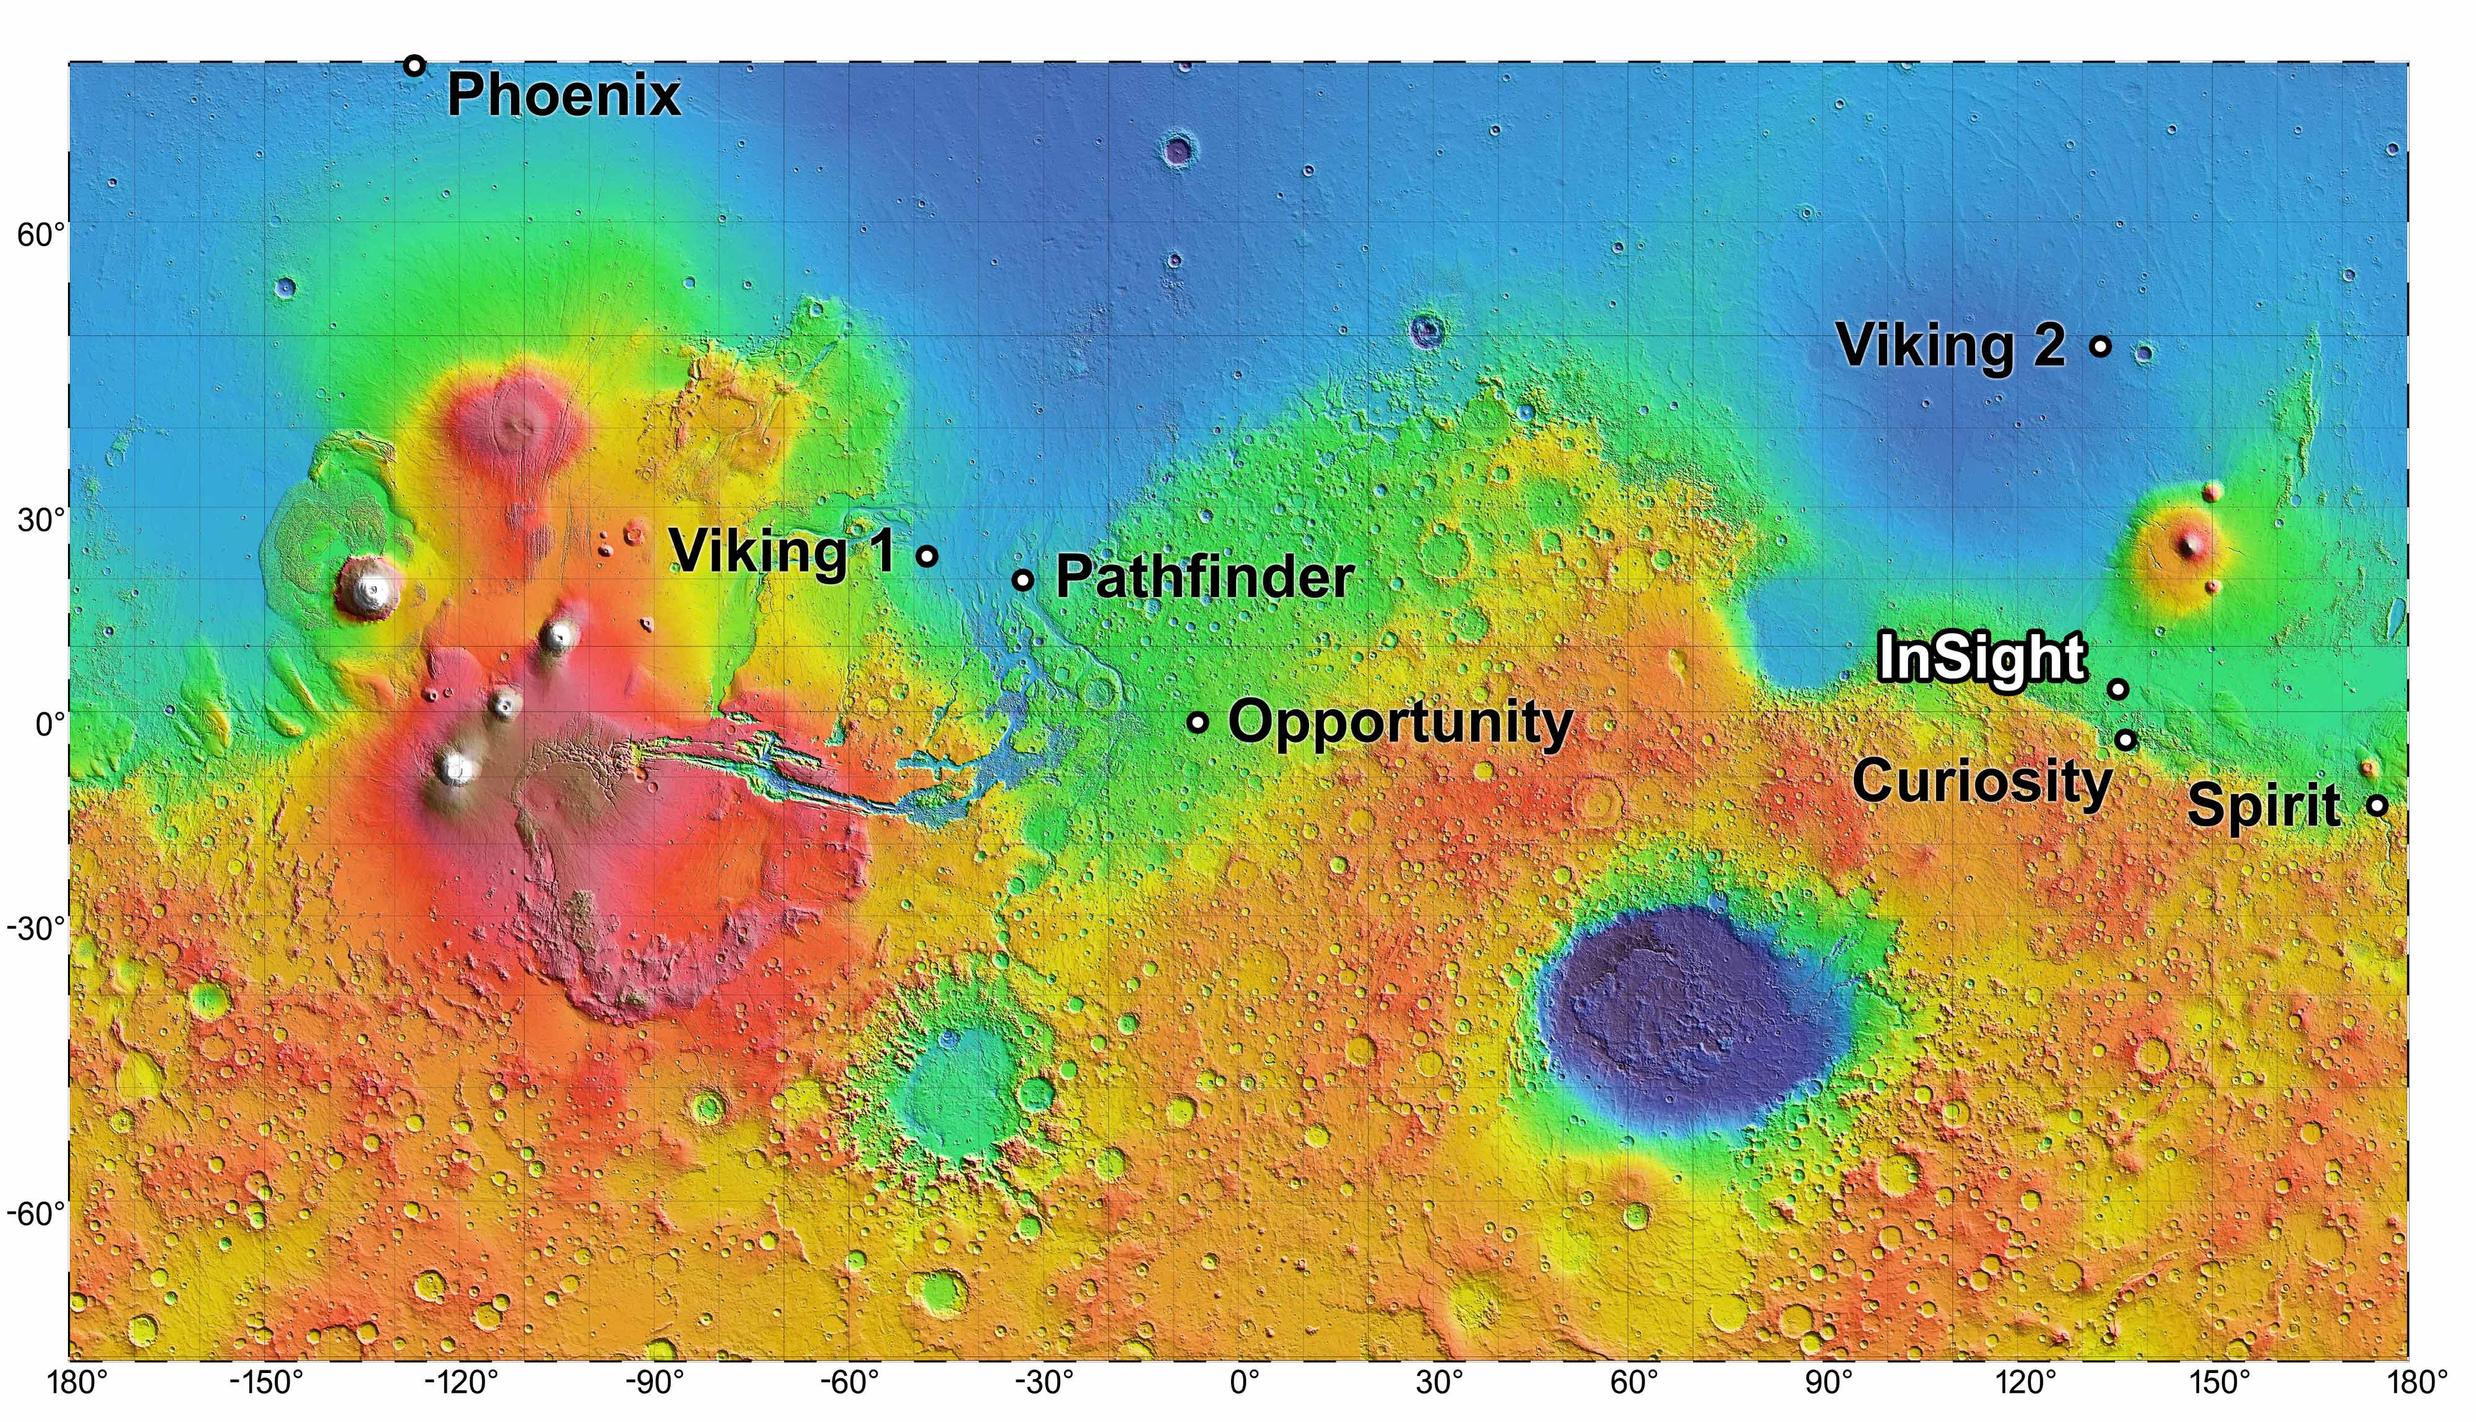 NASA's InSight mission will land in the Elysium Planitia region of Mars. InSight -- an acronym for Interior Exploration using Seismic Investigations, Geodesy and Heat Transport -- will study the deep interior of Mars to improve understanding of the processes that formed and shaped rocky planets, including Earth and its Moon.